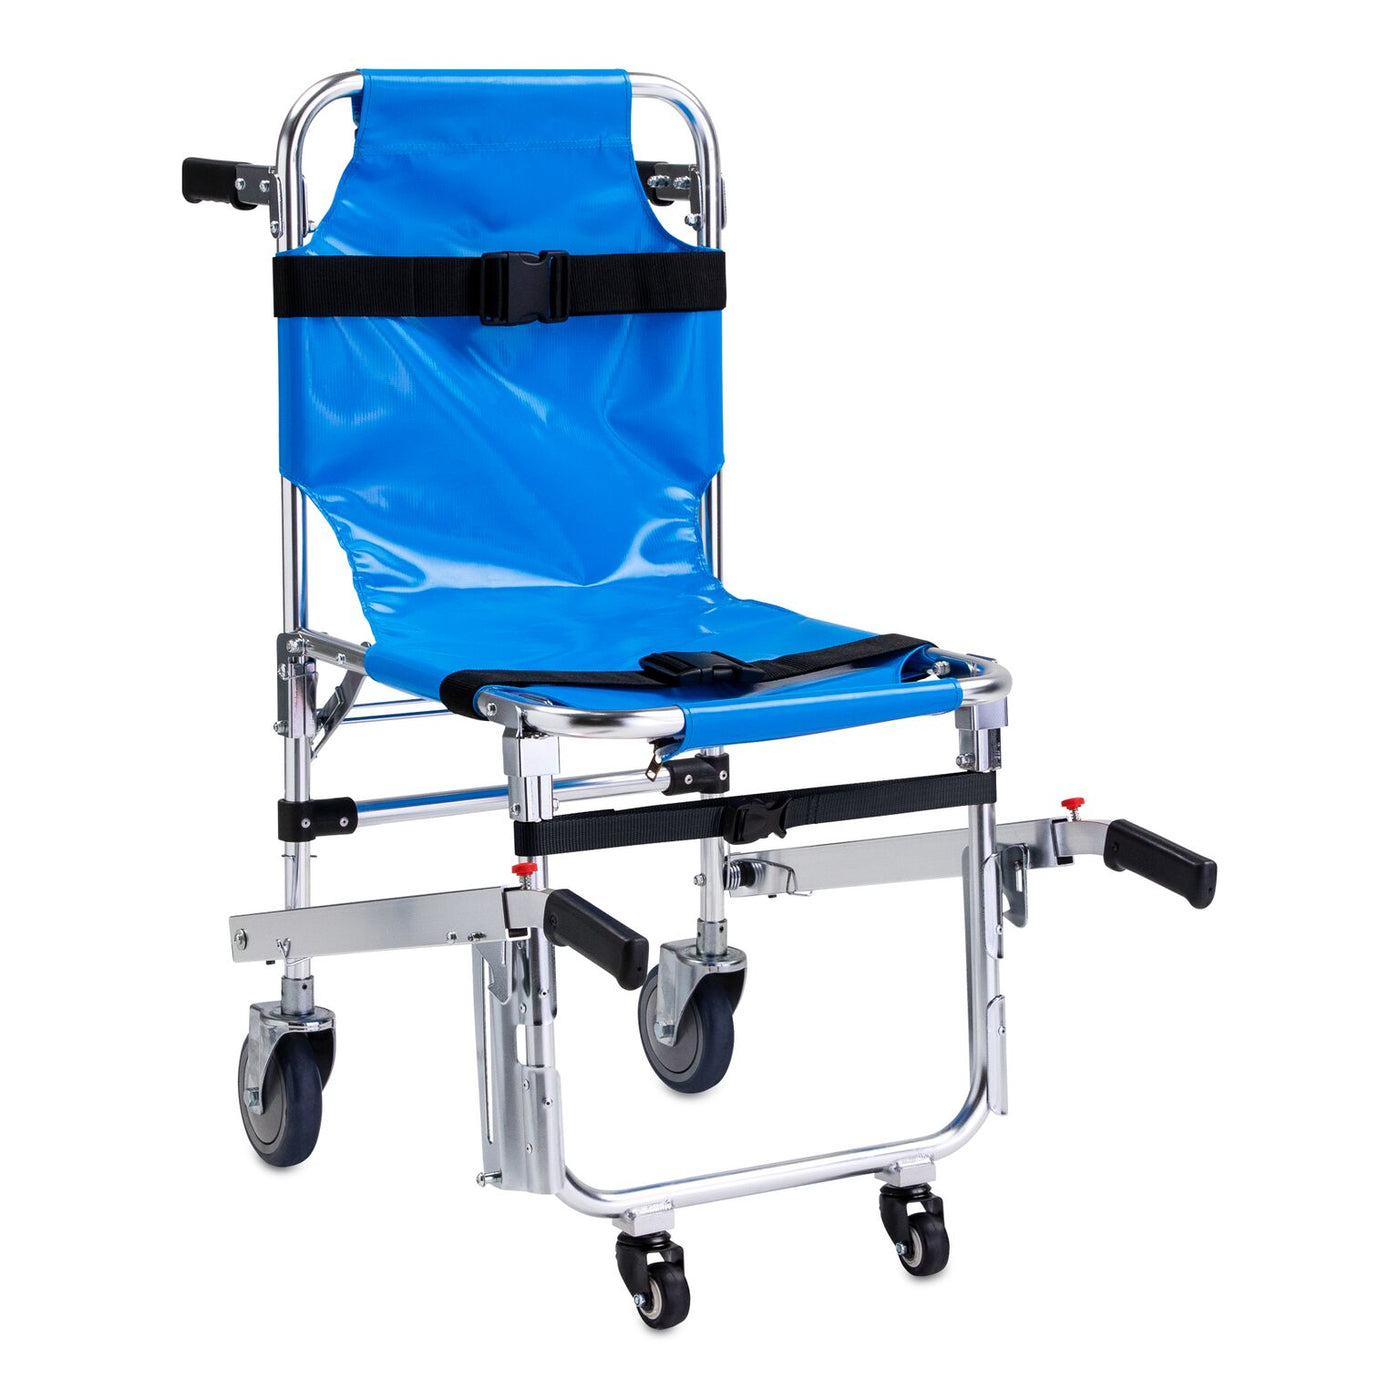 Mobile Stair Chair LINE2design